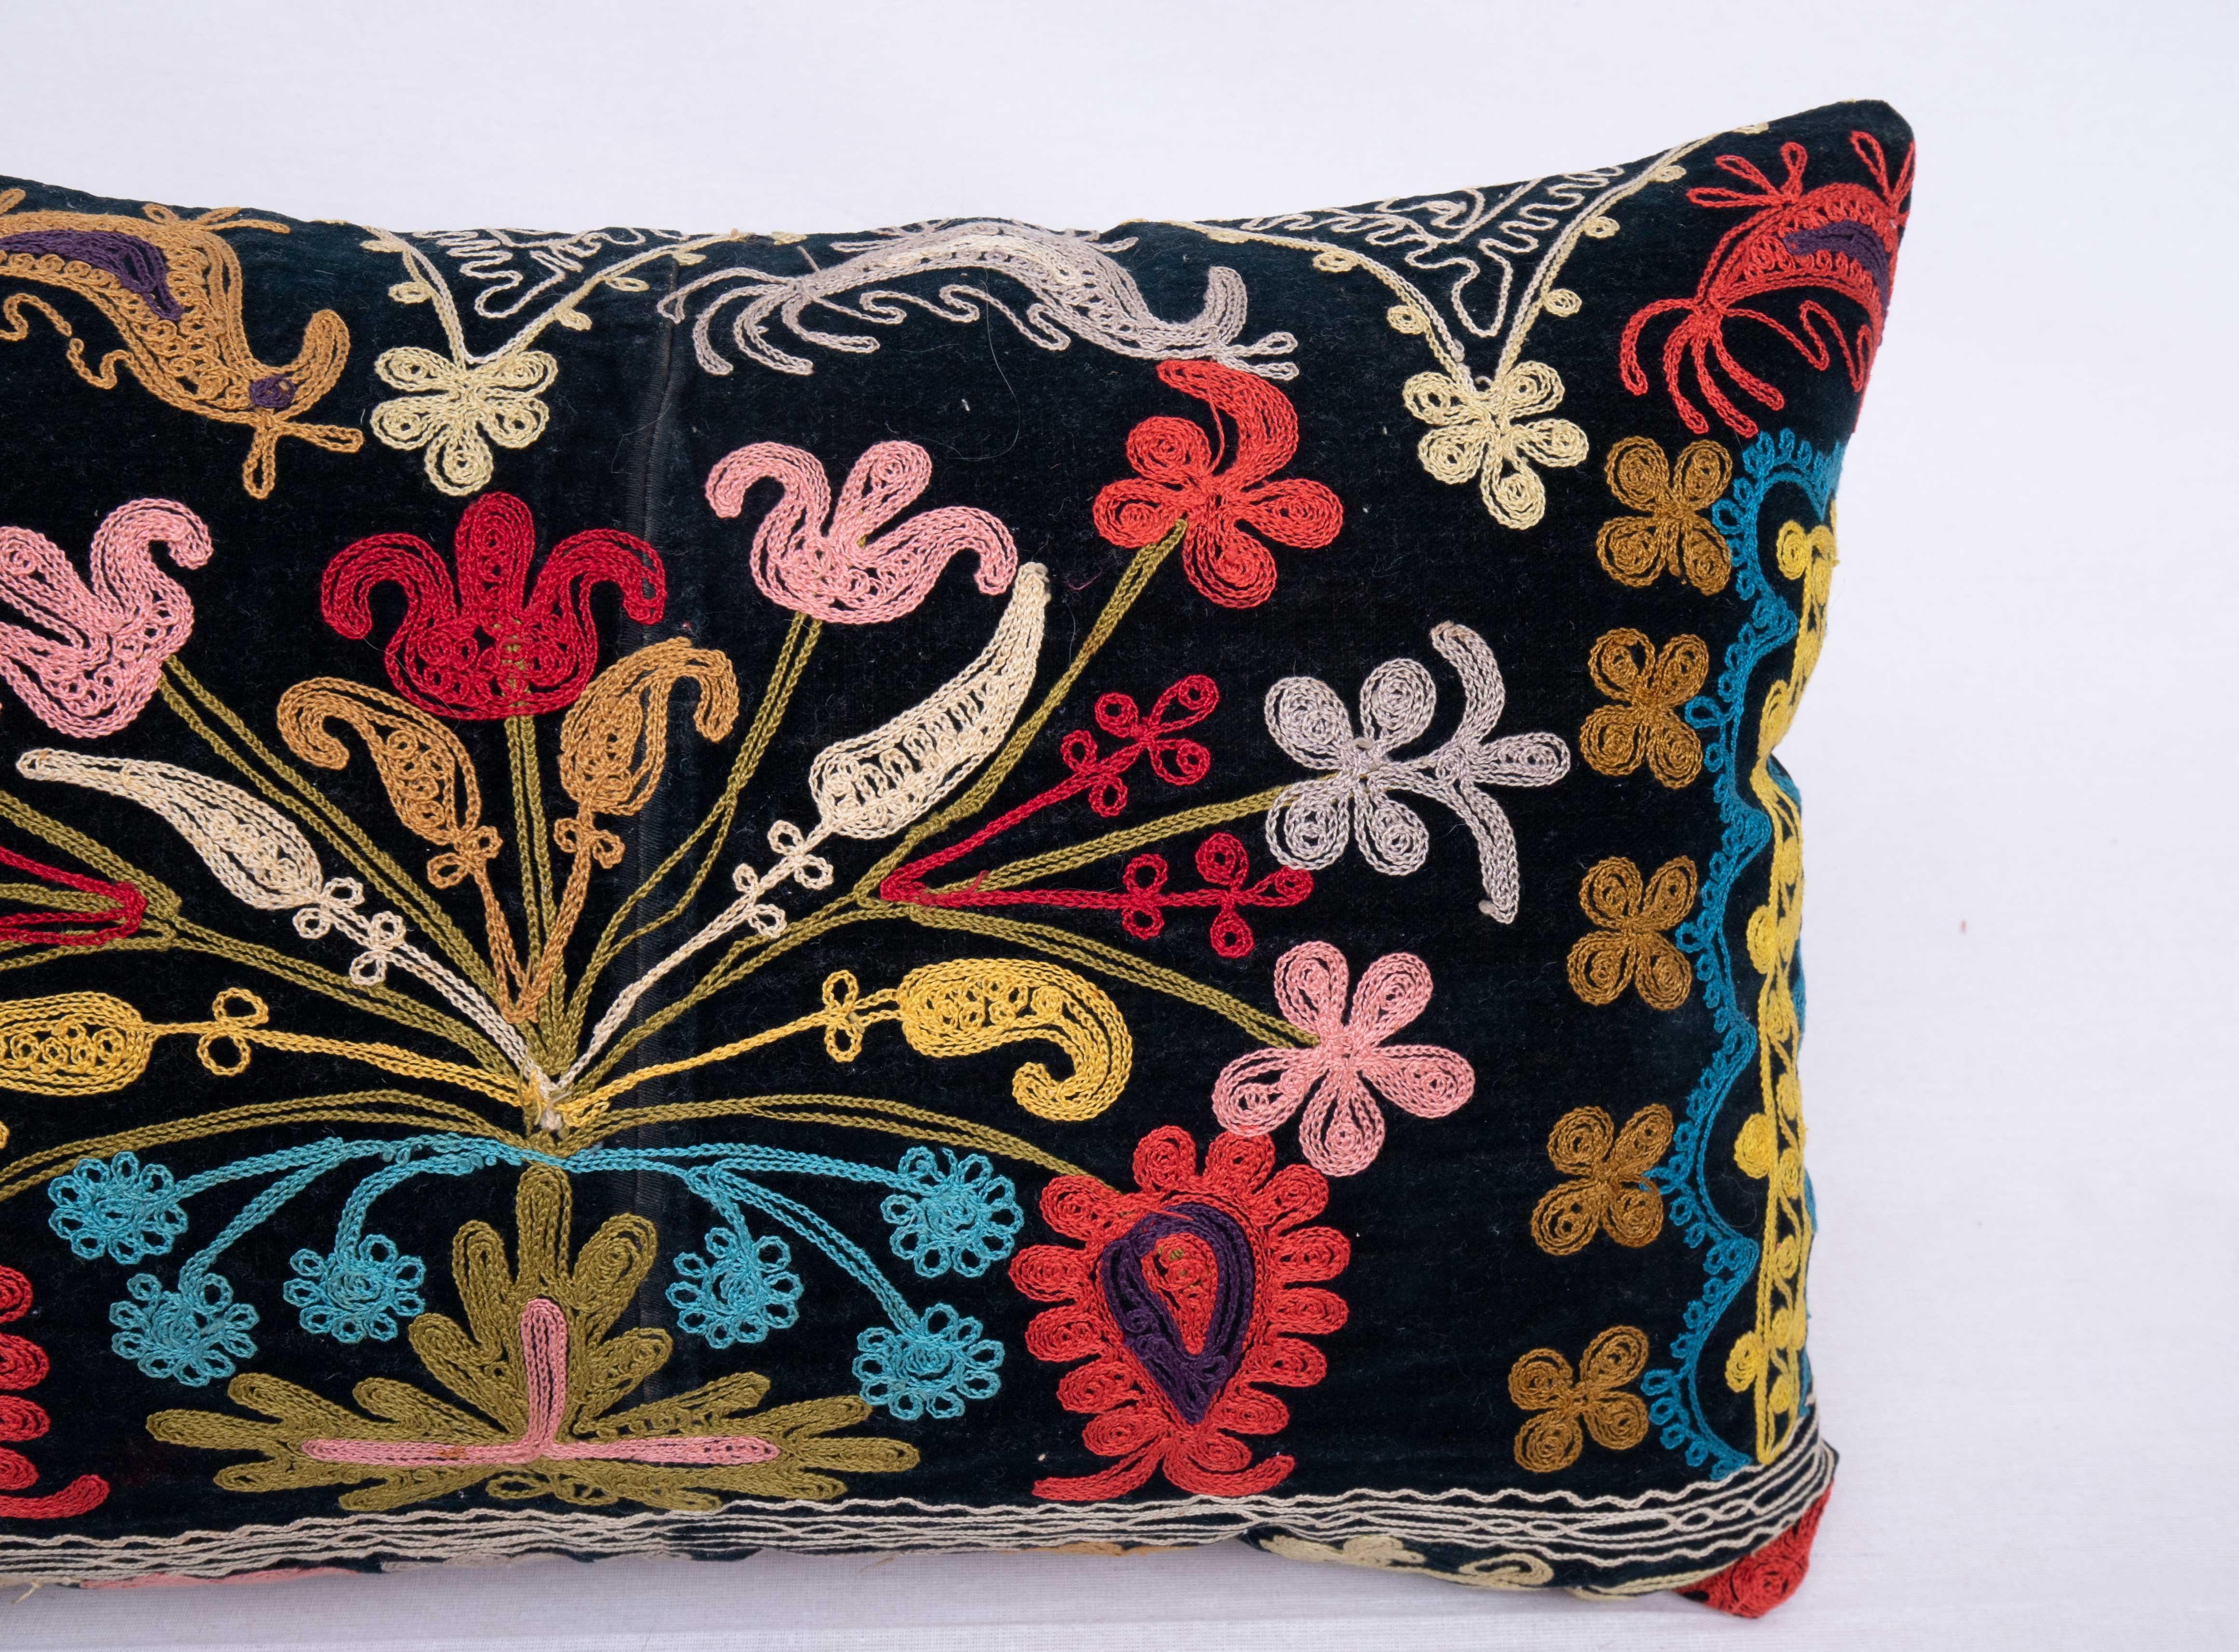 Uzbek Suzani Pillow Cover Made from a Vintage Velvet Suzani For Sale